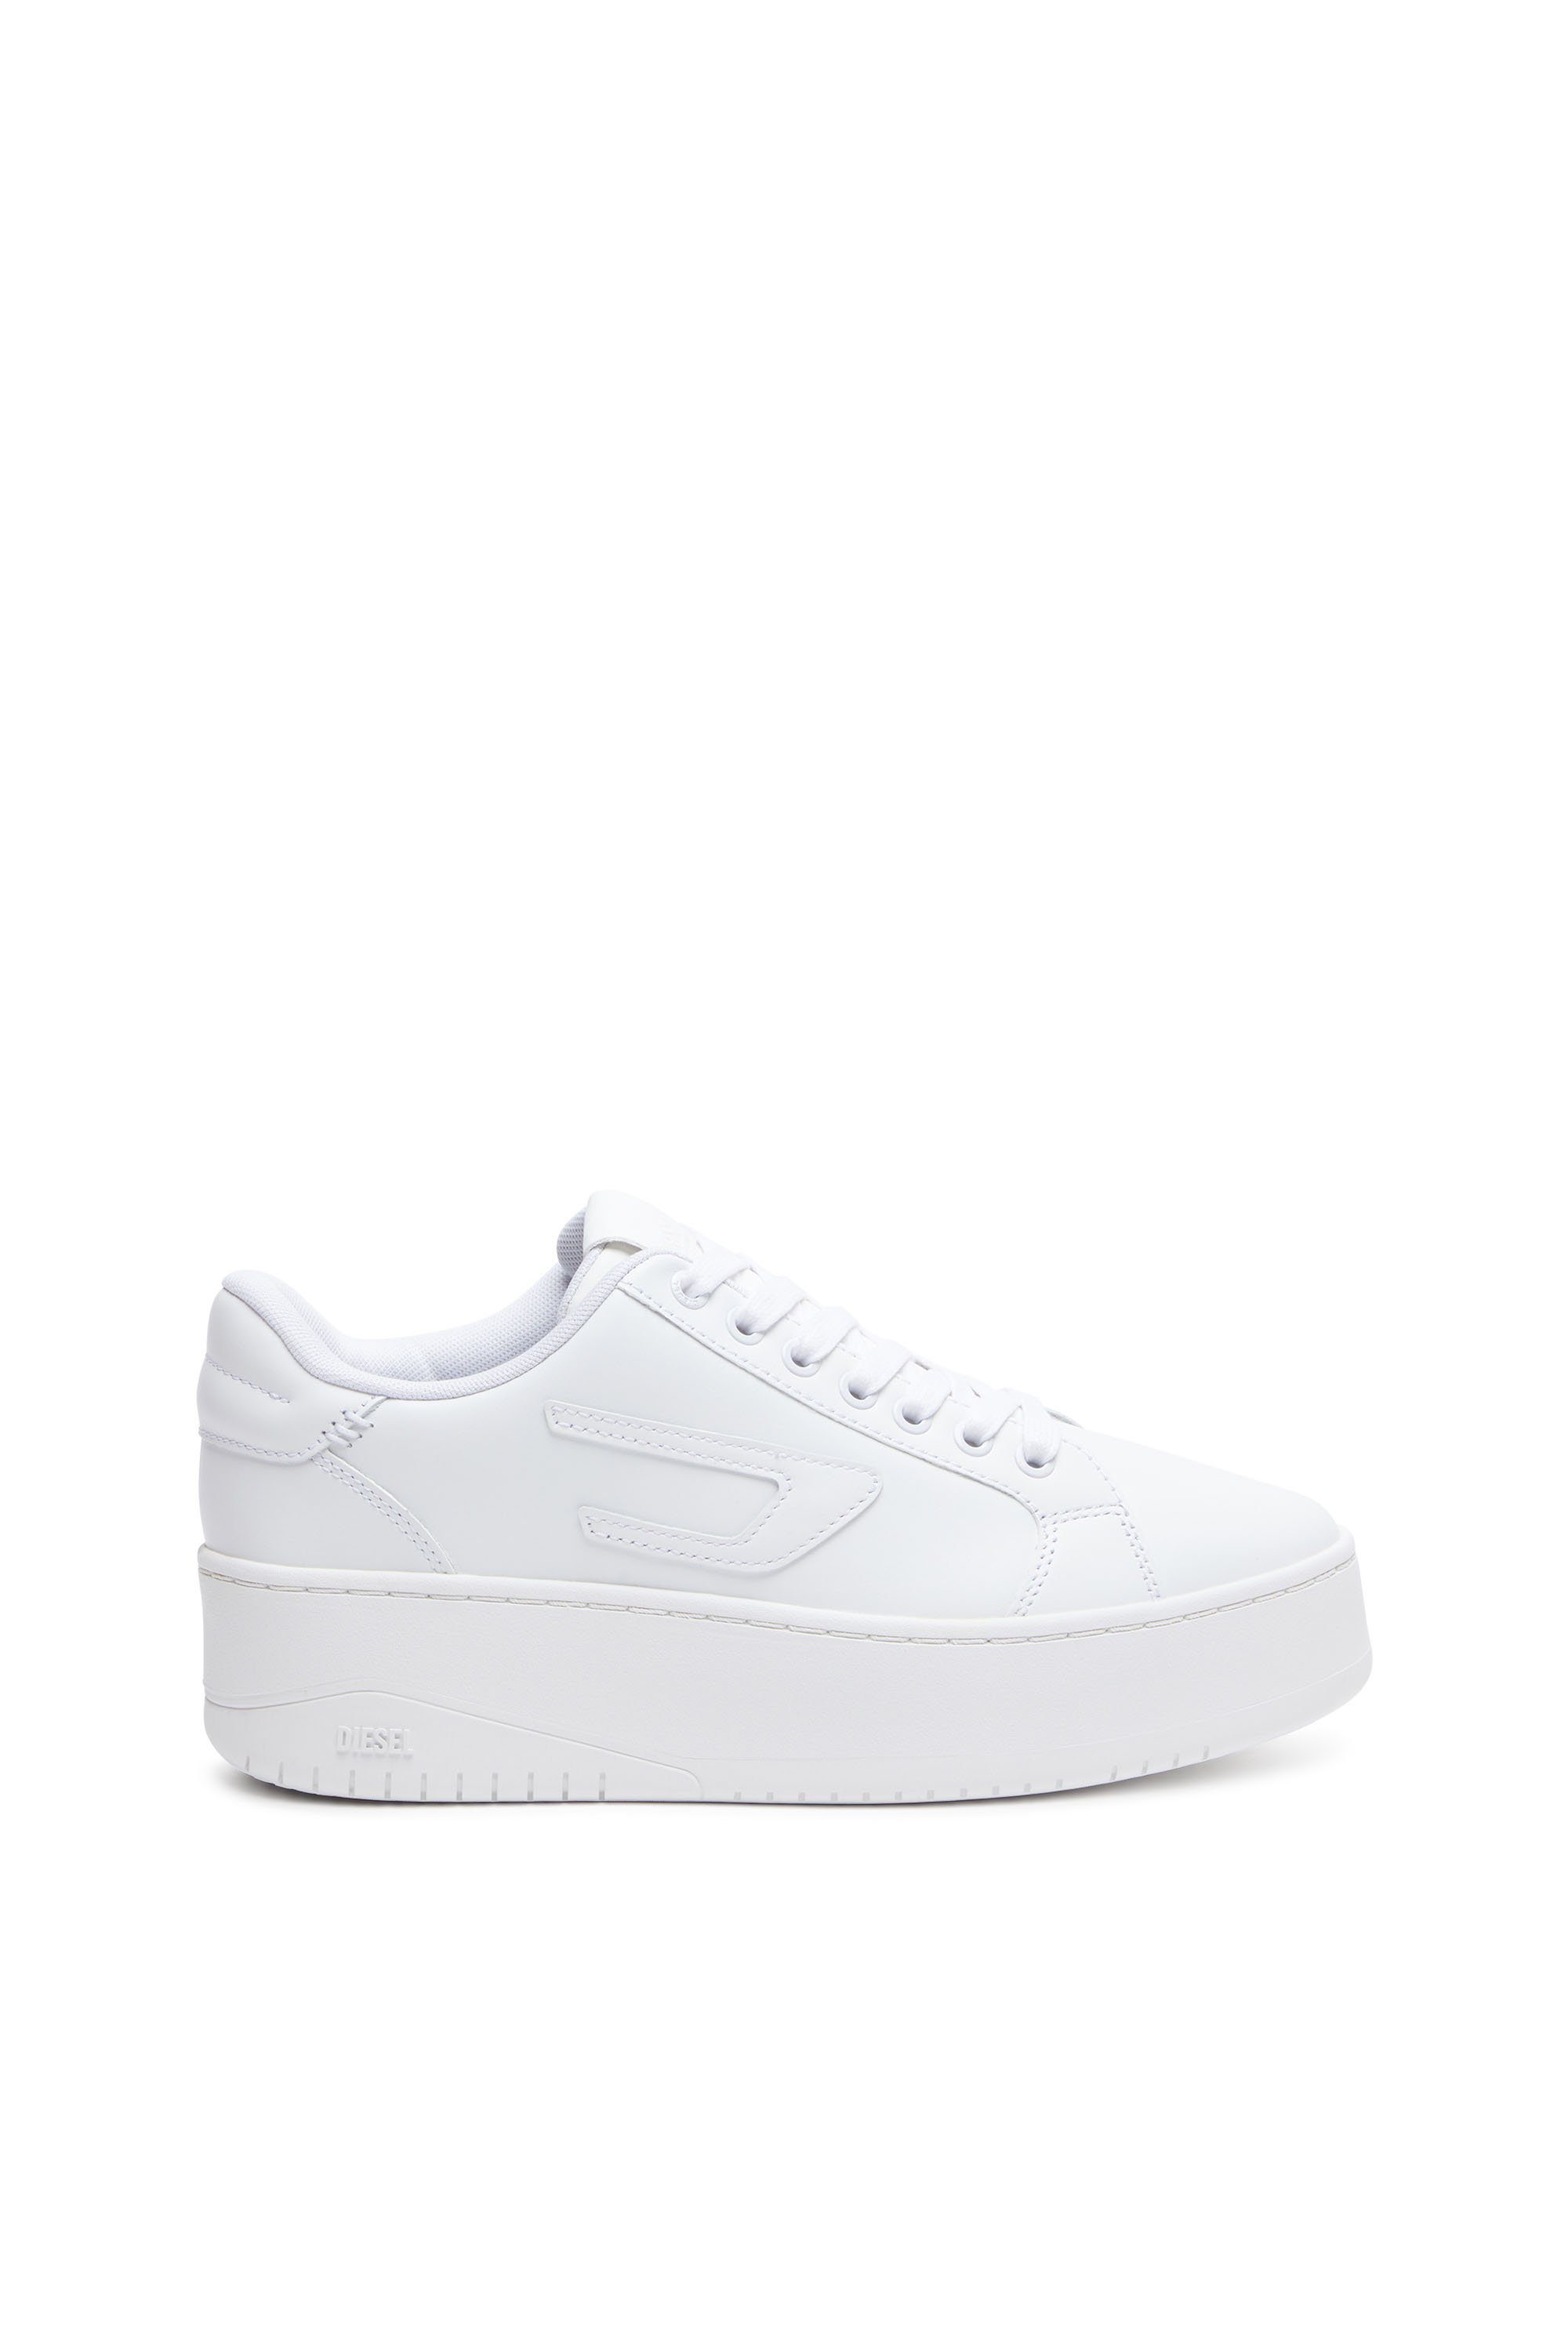 Diesel - S-Athene Bold X - Flatform sneakers in leather - Sneakers - Woman - White